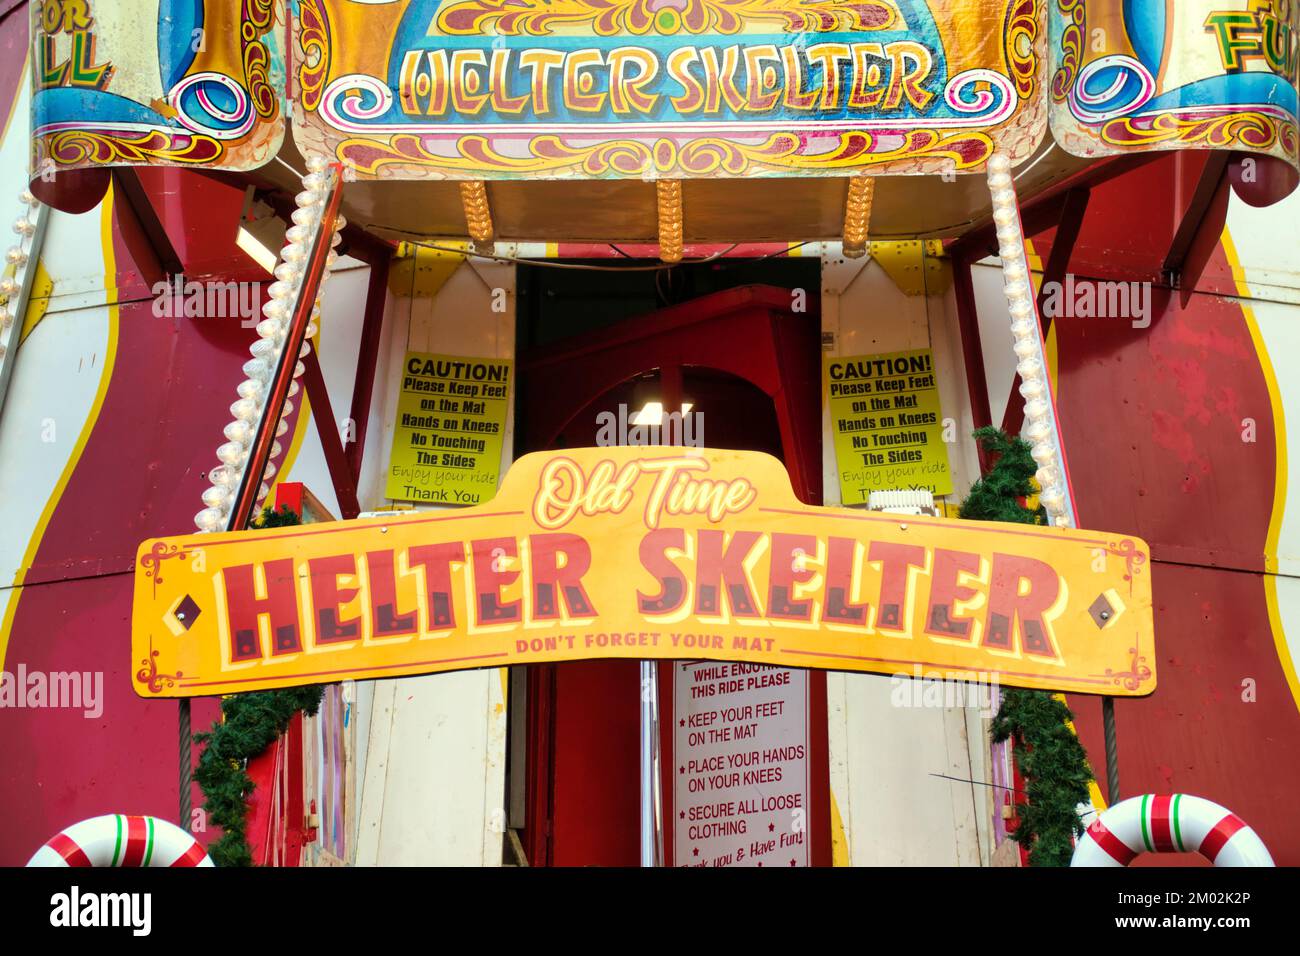 helter skelter detail text and logo Stock Photo